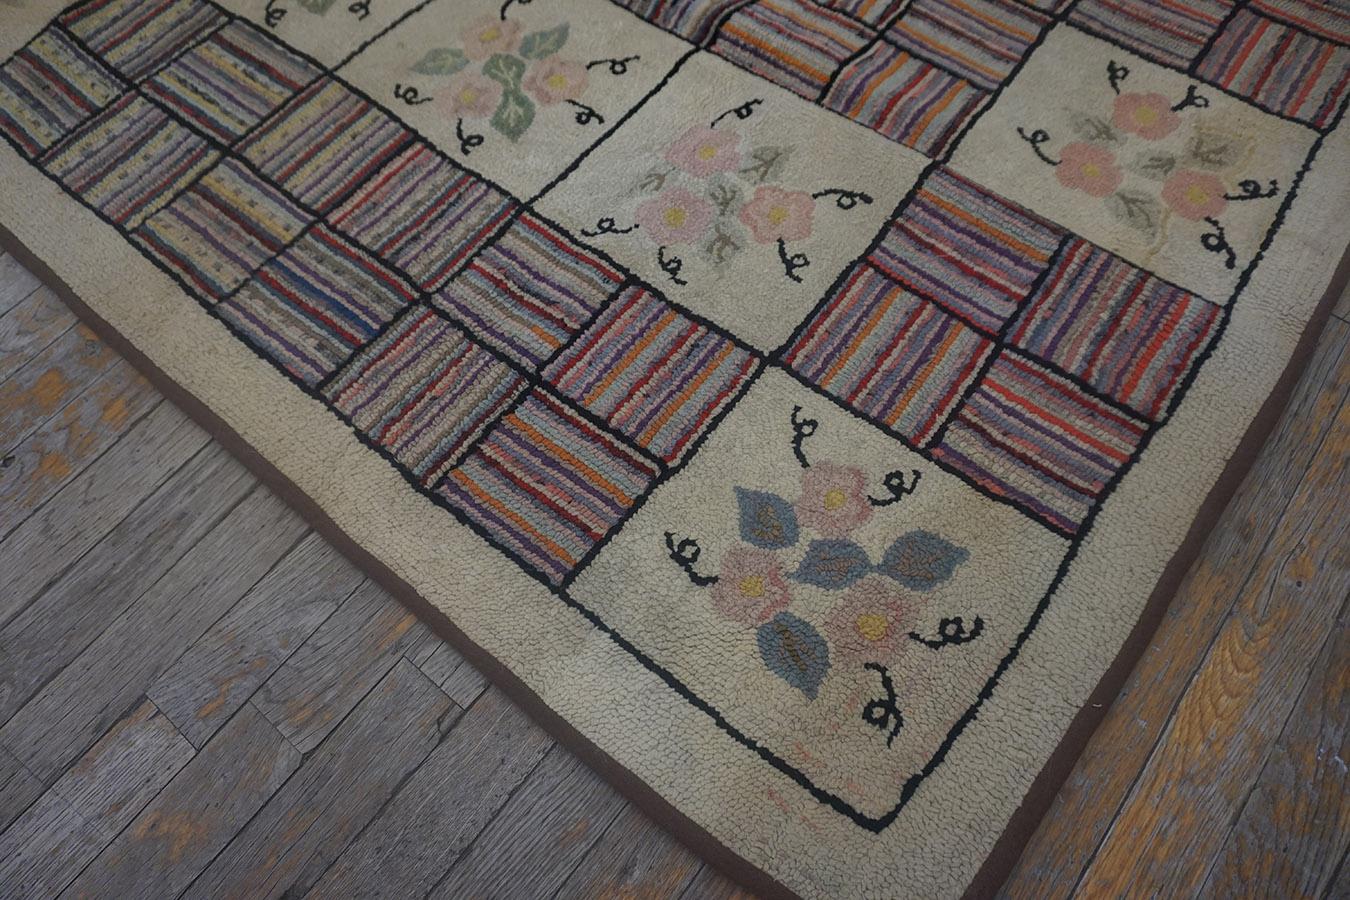 Hand-Woven 1930s American Hooked Rug 4'8